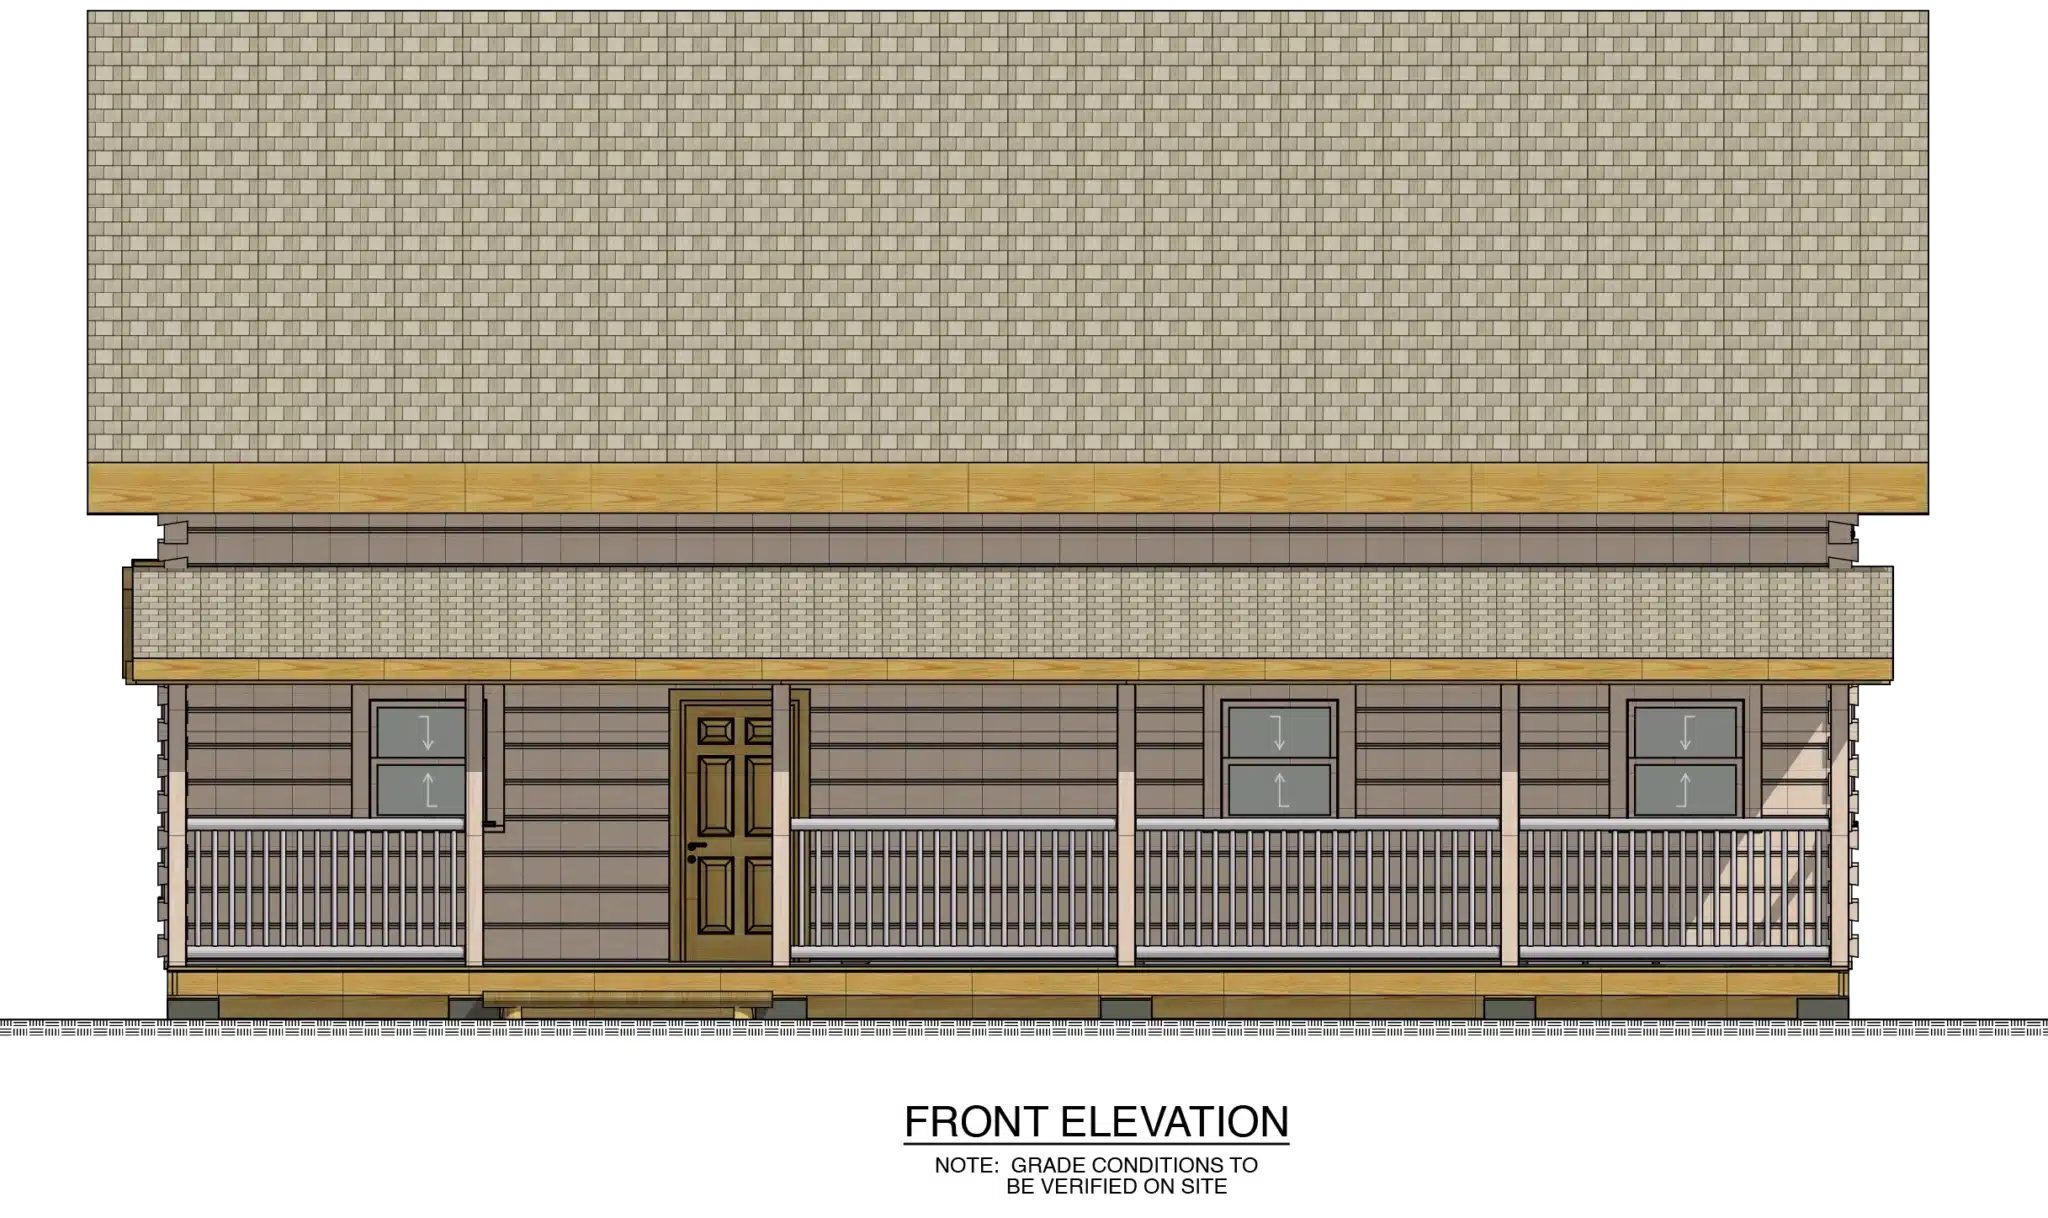 The Pioneer log home Front Elevation